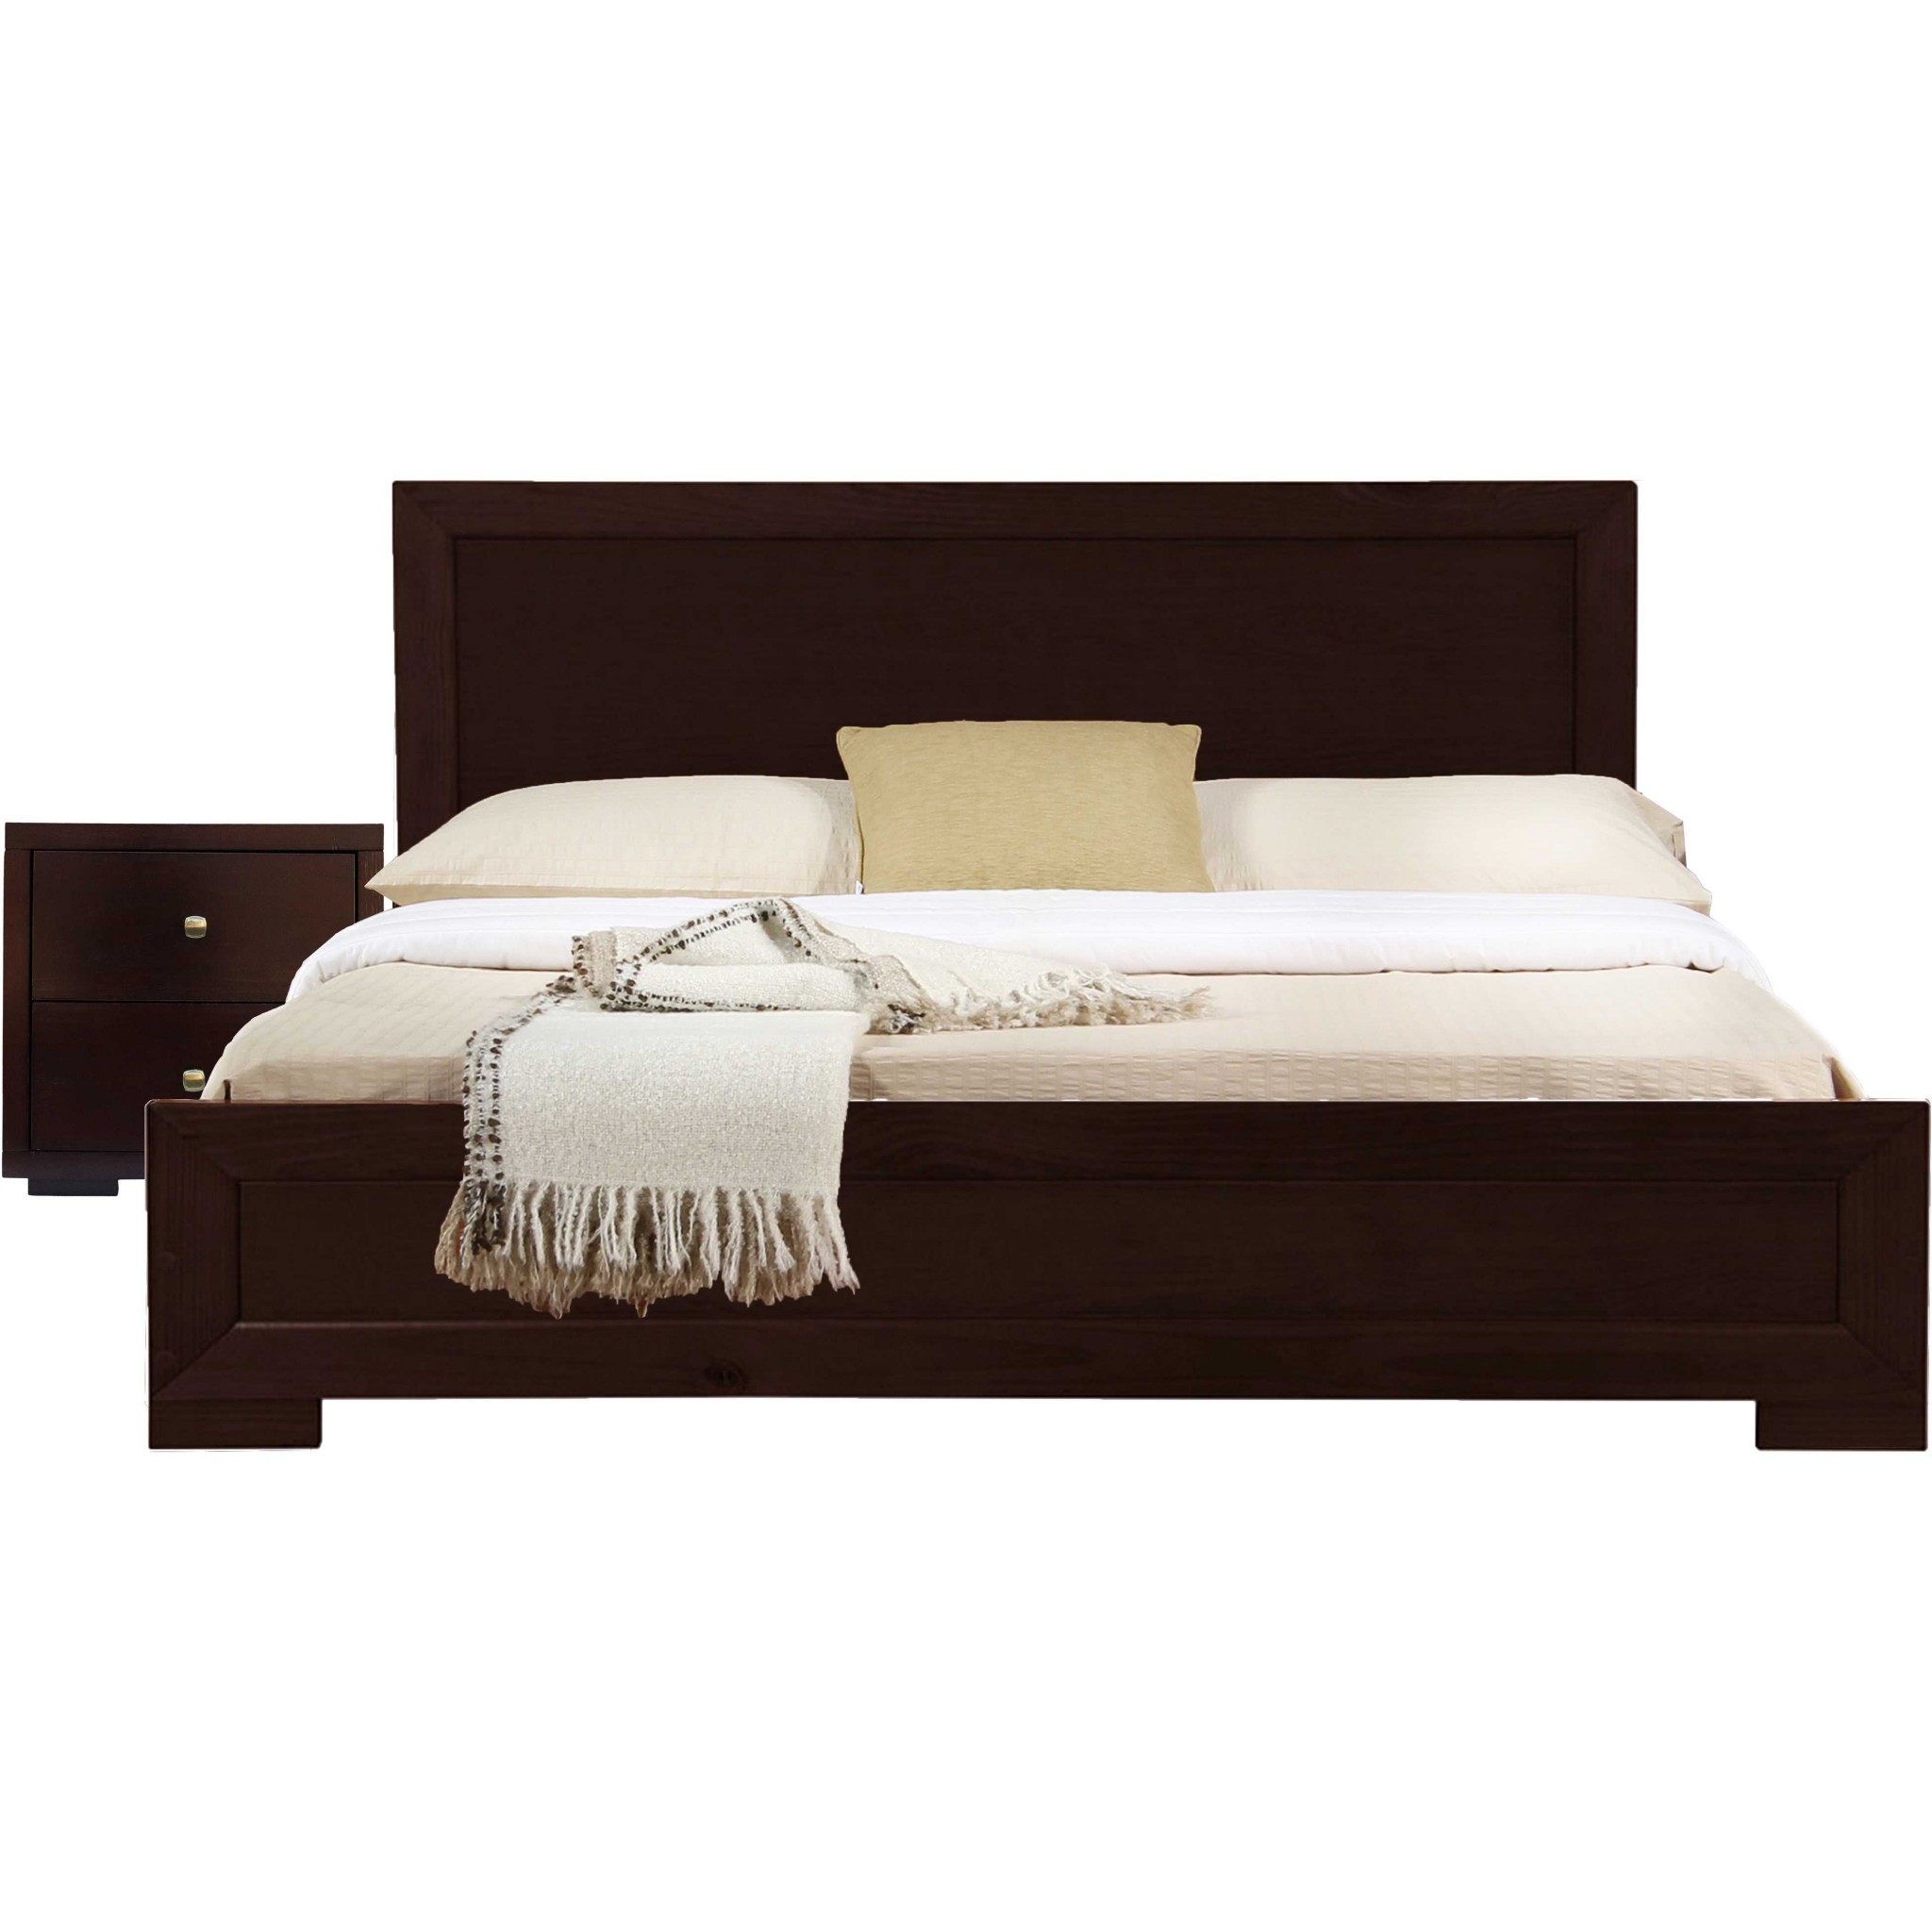 Moma Espresso Wood Platform Full Bed With Nightstand-468272-1